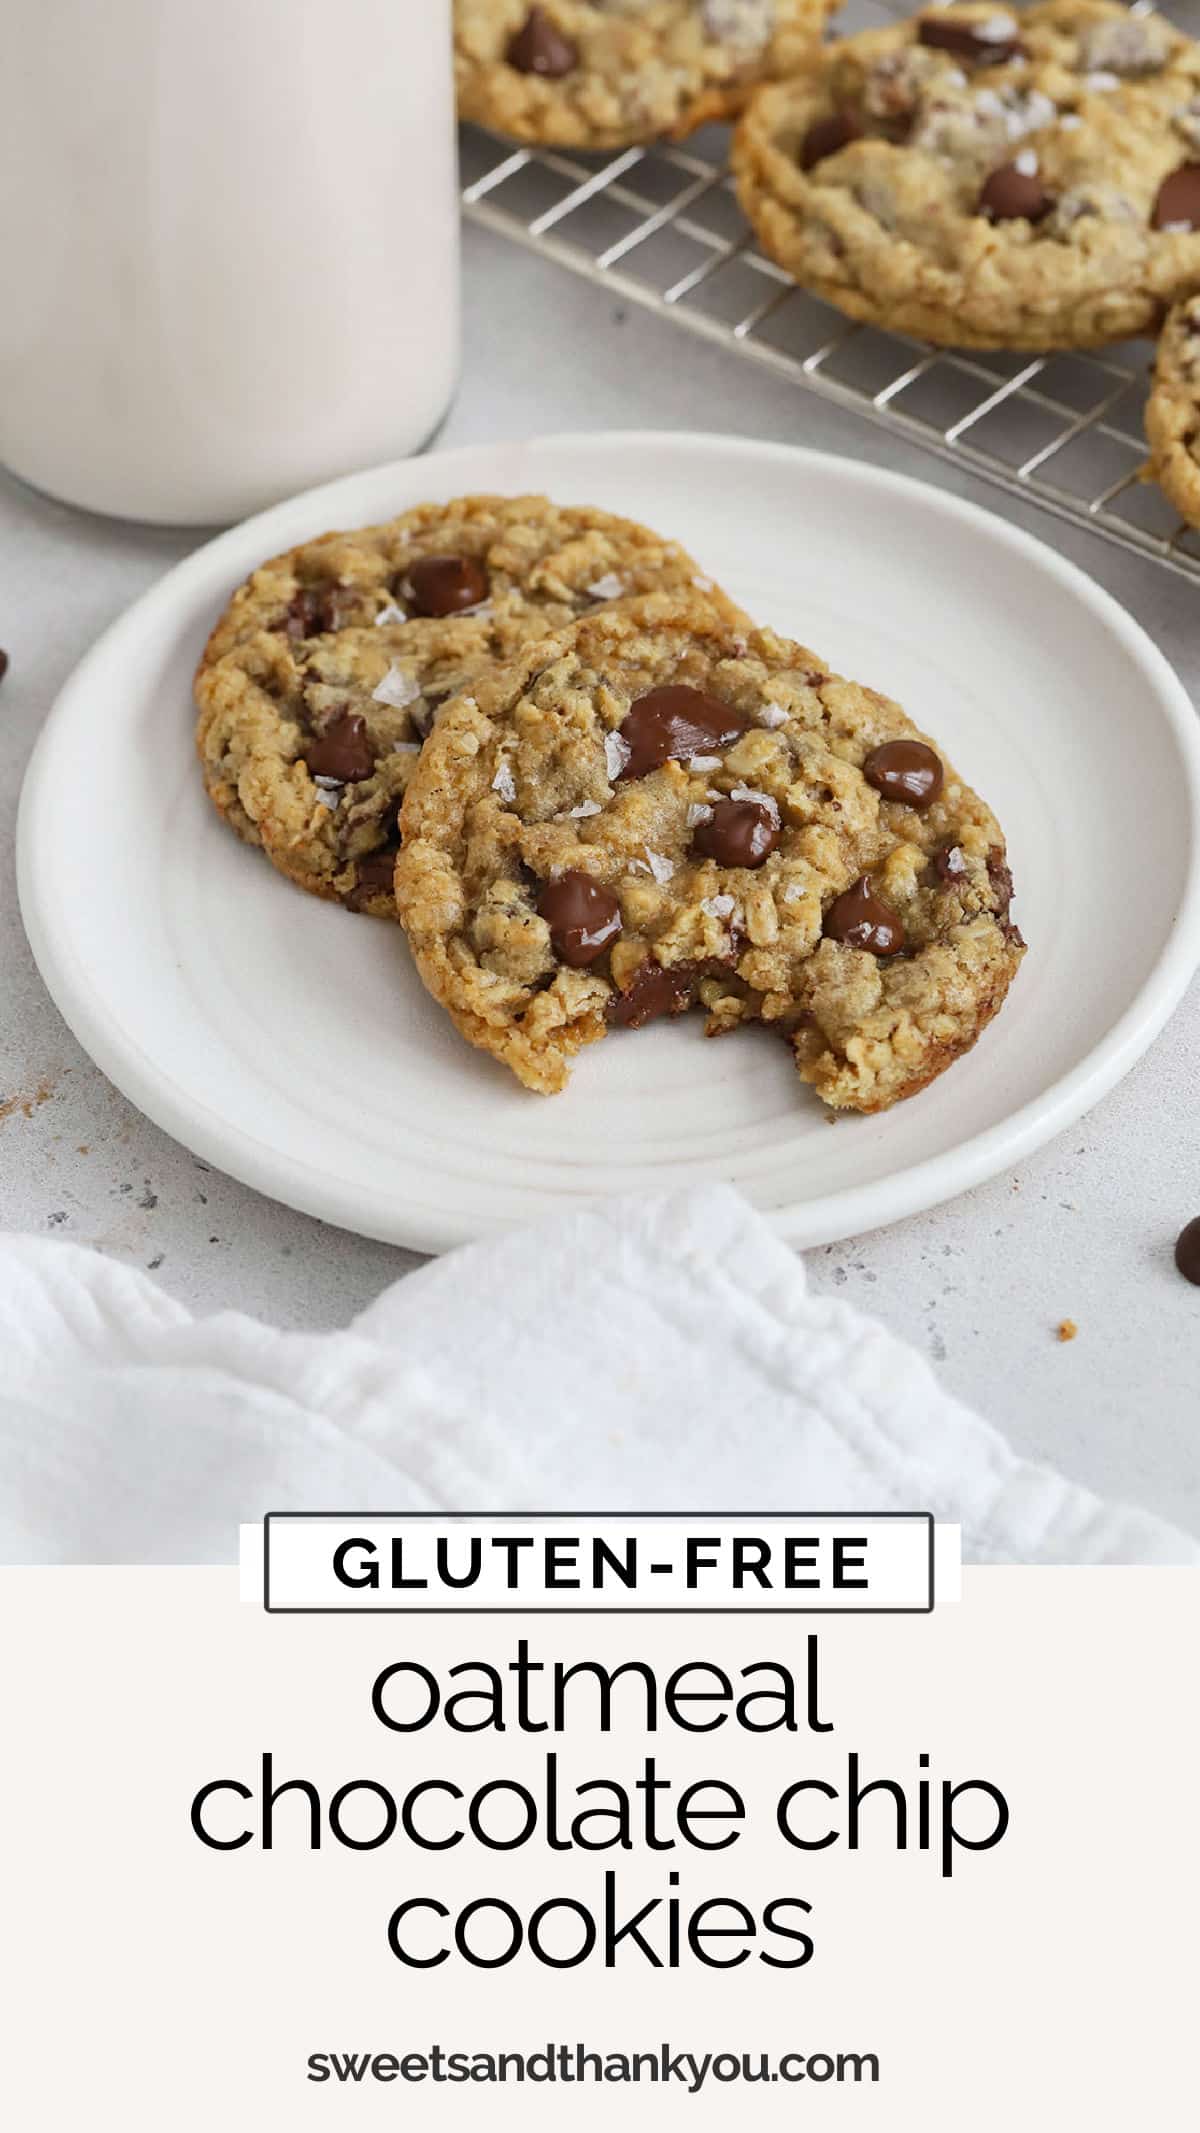 This Gluten-Free Oatmeal Chocolate Chip Cookies recipe is soft, chewy, and full of chocolate in every bite. The perfect classic cookie recipe! // gluten-free oatmeal cookies // gluten-free oatmeal cookie recipe / gluten-free chocolate chip oatmeal cookie recipe / gluten-free cookies / gluten-free christmas cookies / easy gluten-free cookie recipe